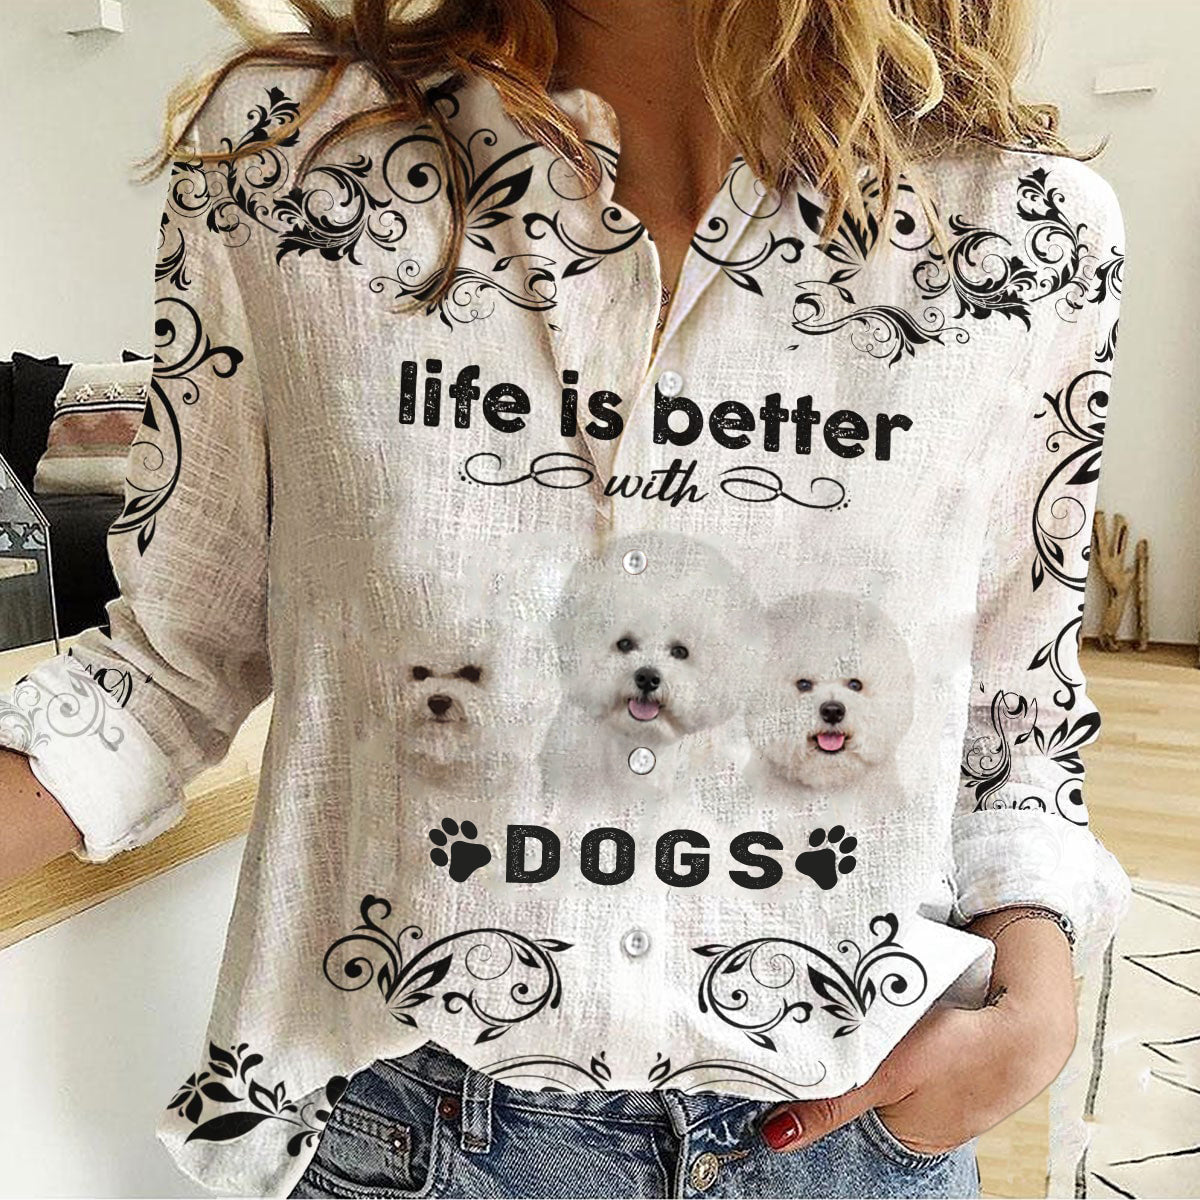 Bichon Frise -Life Is Better With Dogs Women's Long-Sleeve Shirt